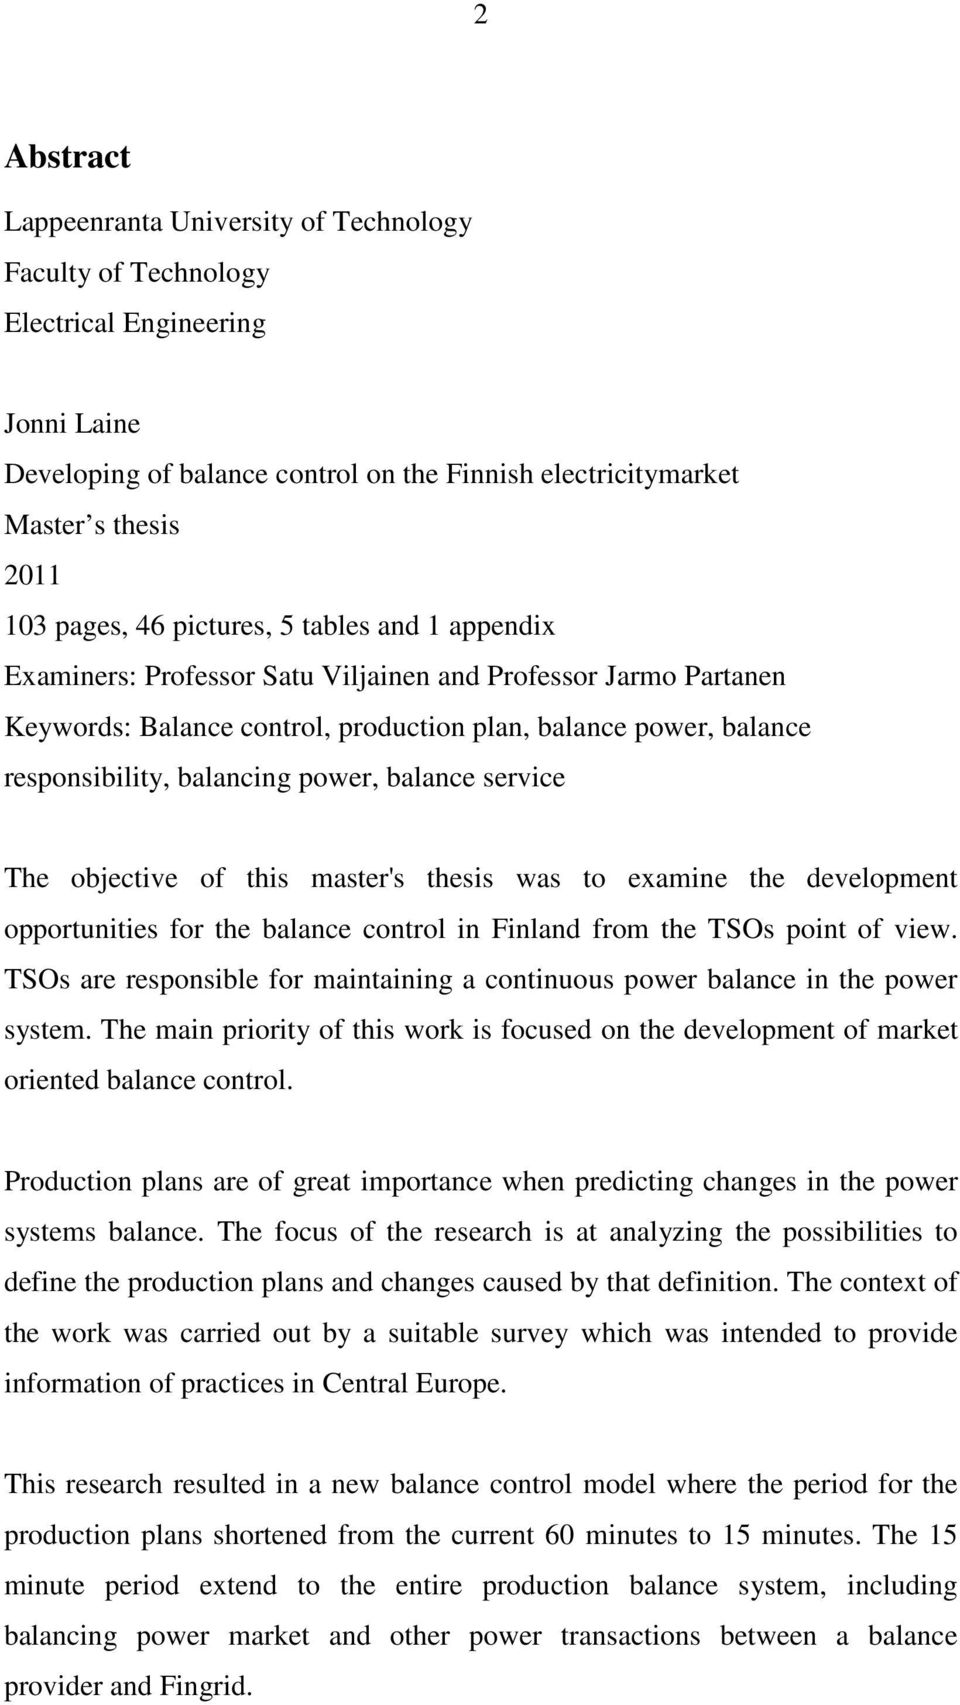 balancing power, balance service The objective of this master's thesis was to examine the development opportunities for the balance control in Finland from the TSOs point of view.